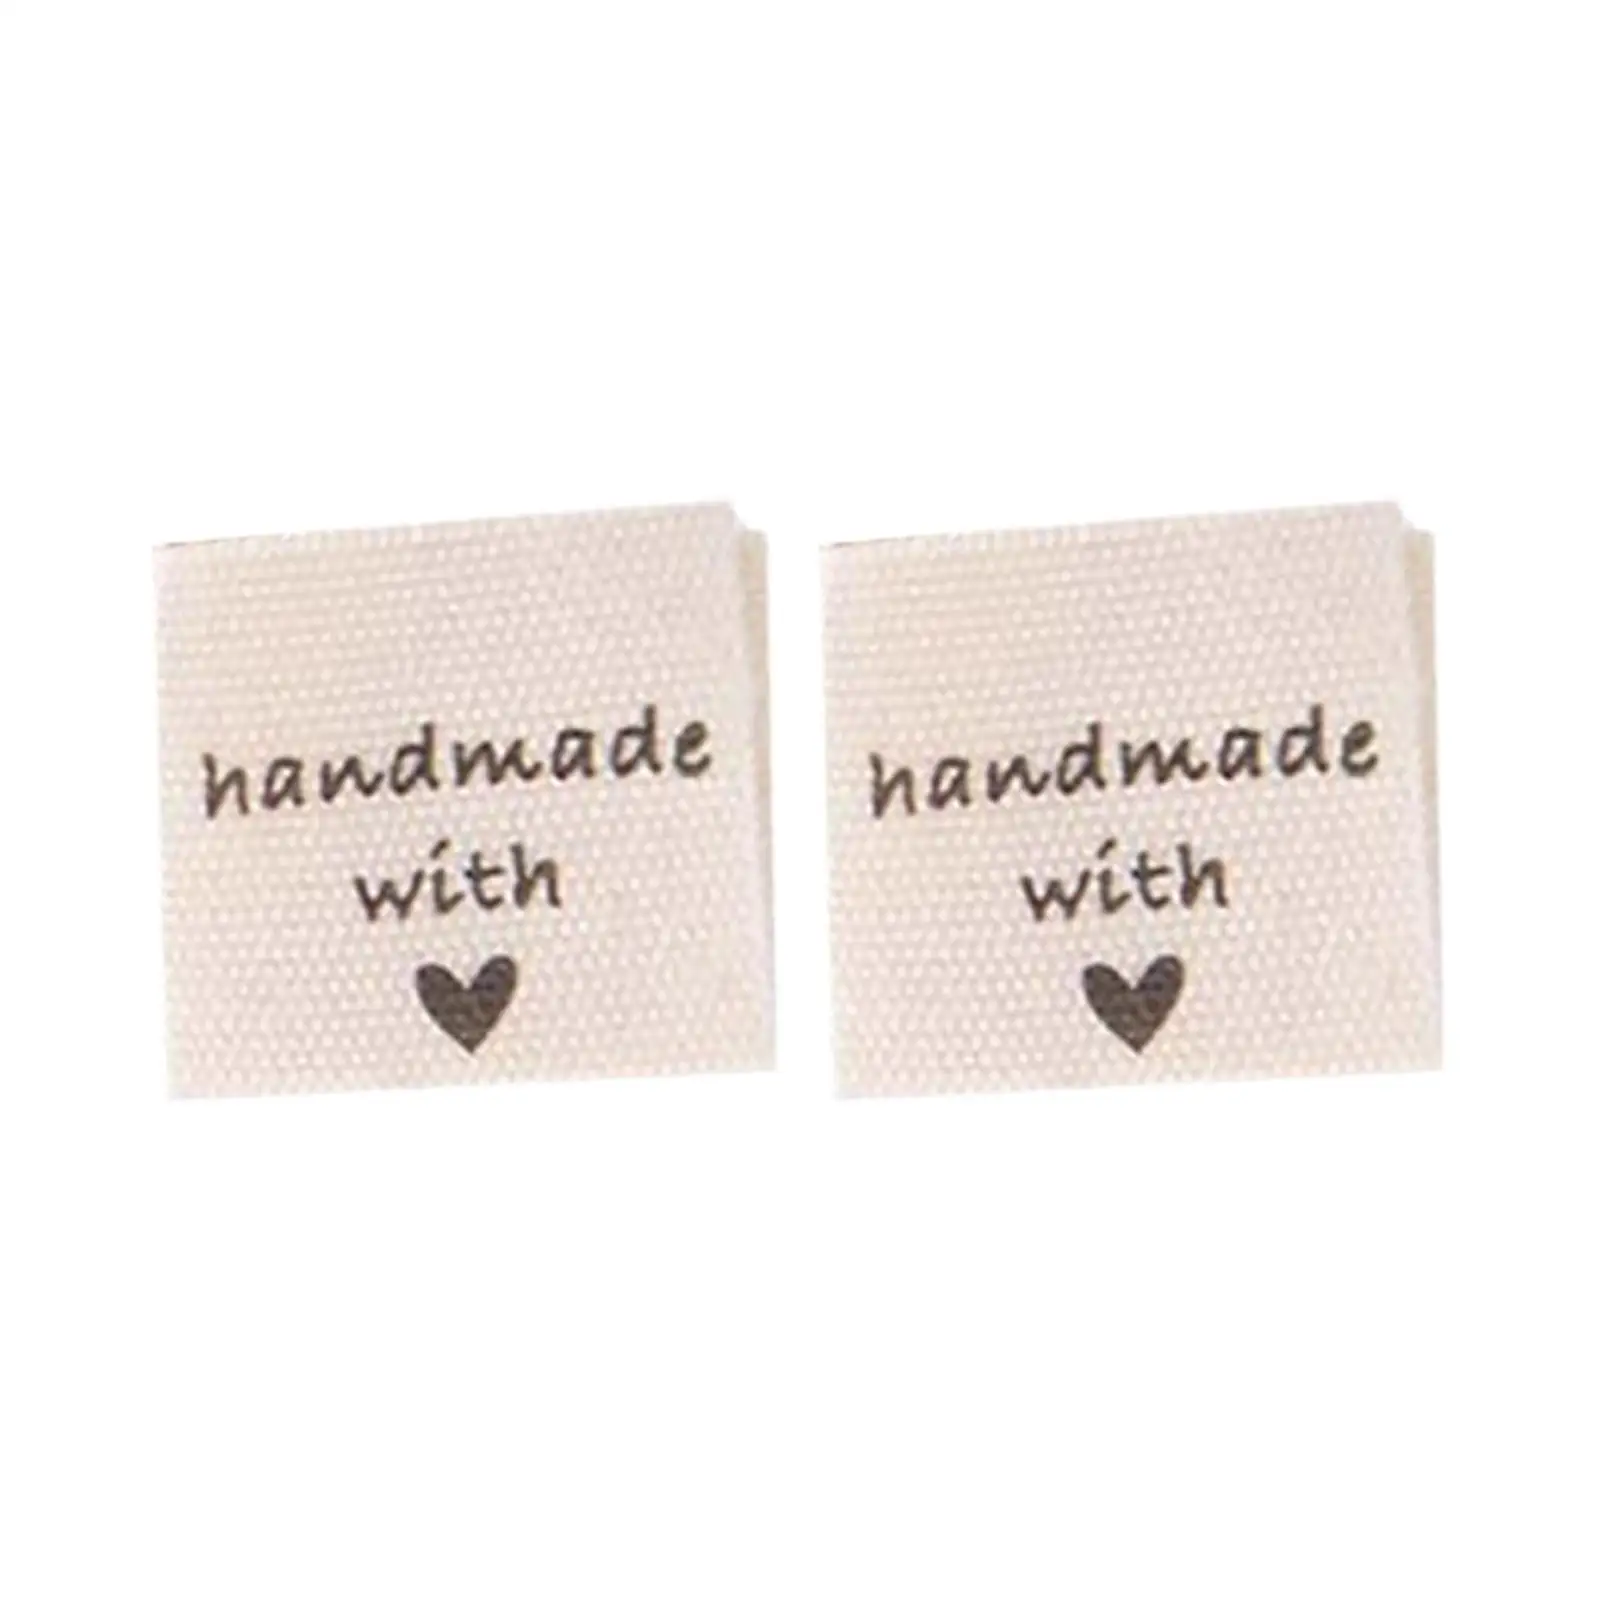 Clothing Labels, Handmade Labels Garment Decoration for Hats Knitting Shoes Tags Purses